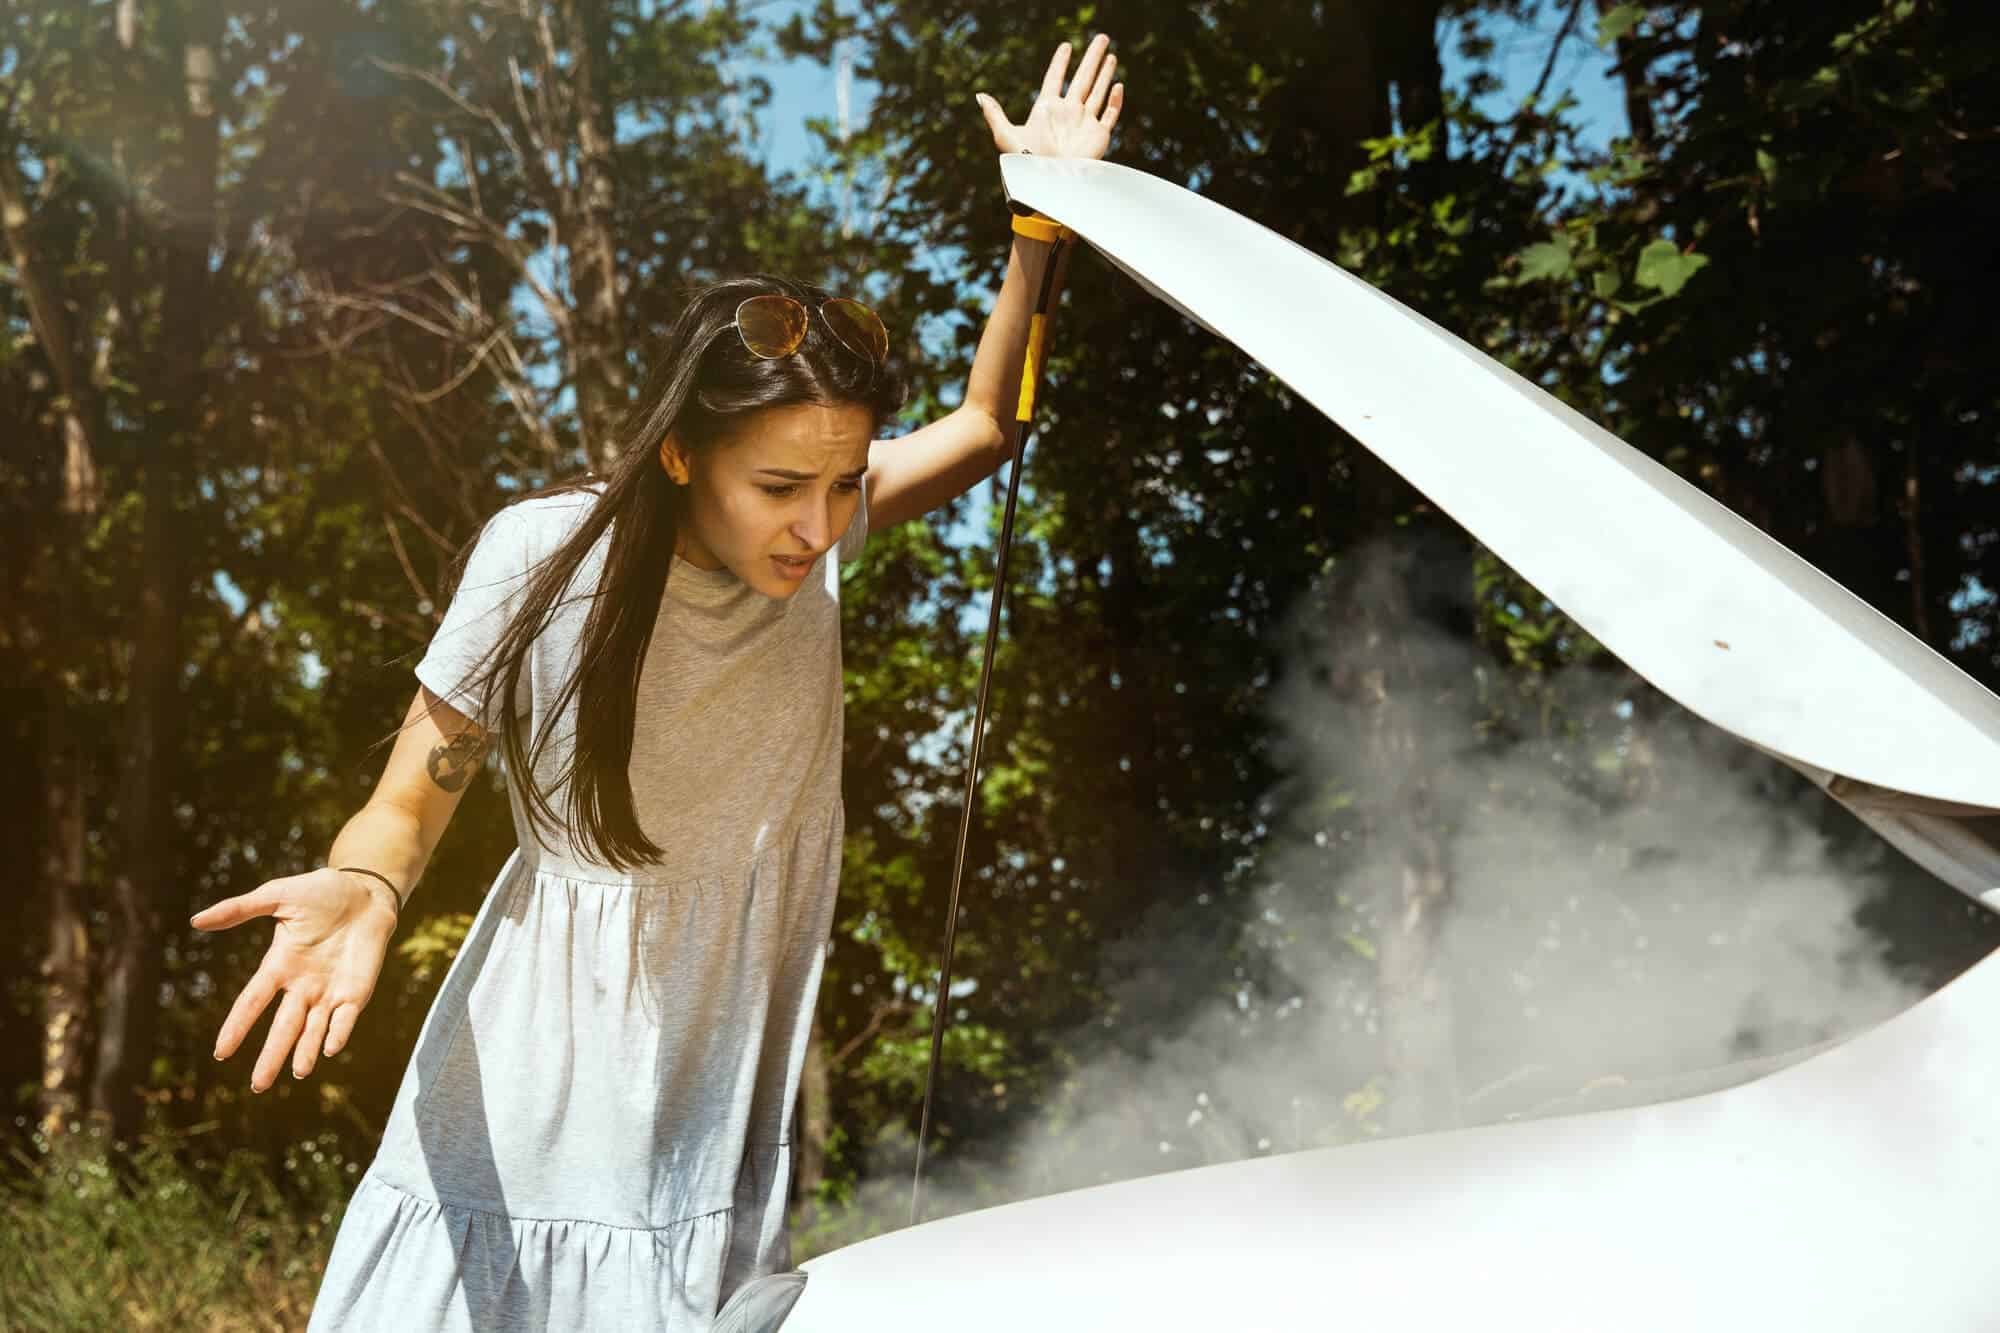 12 Expert Tips for Preparing Your Car for Summer Heat